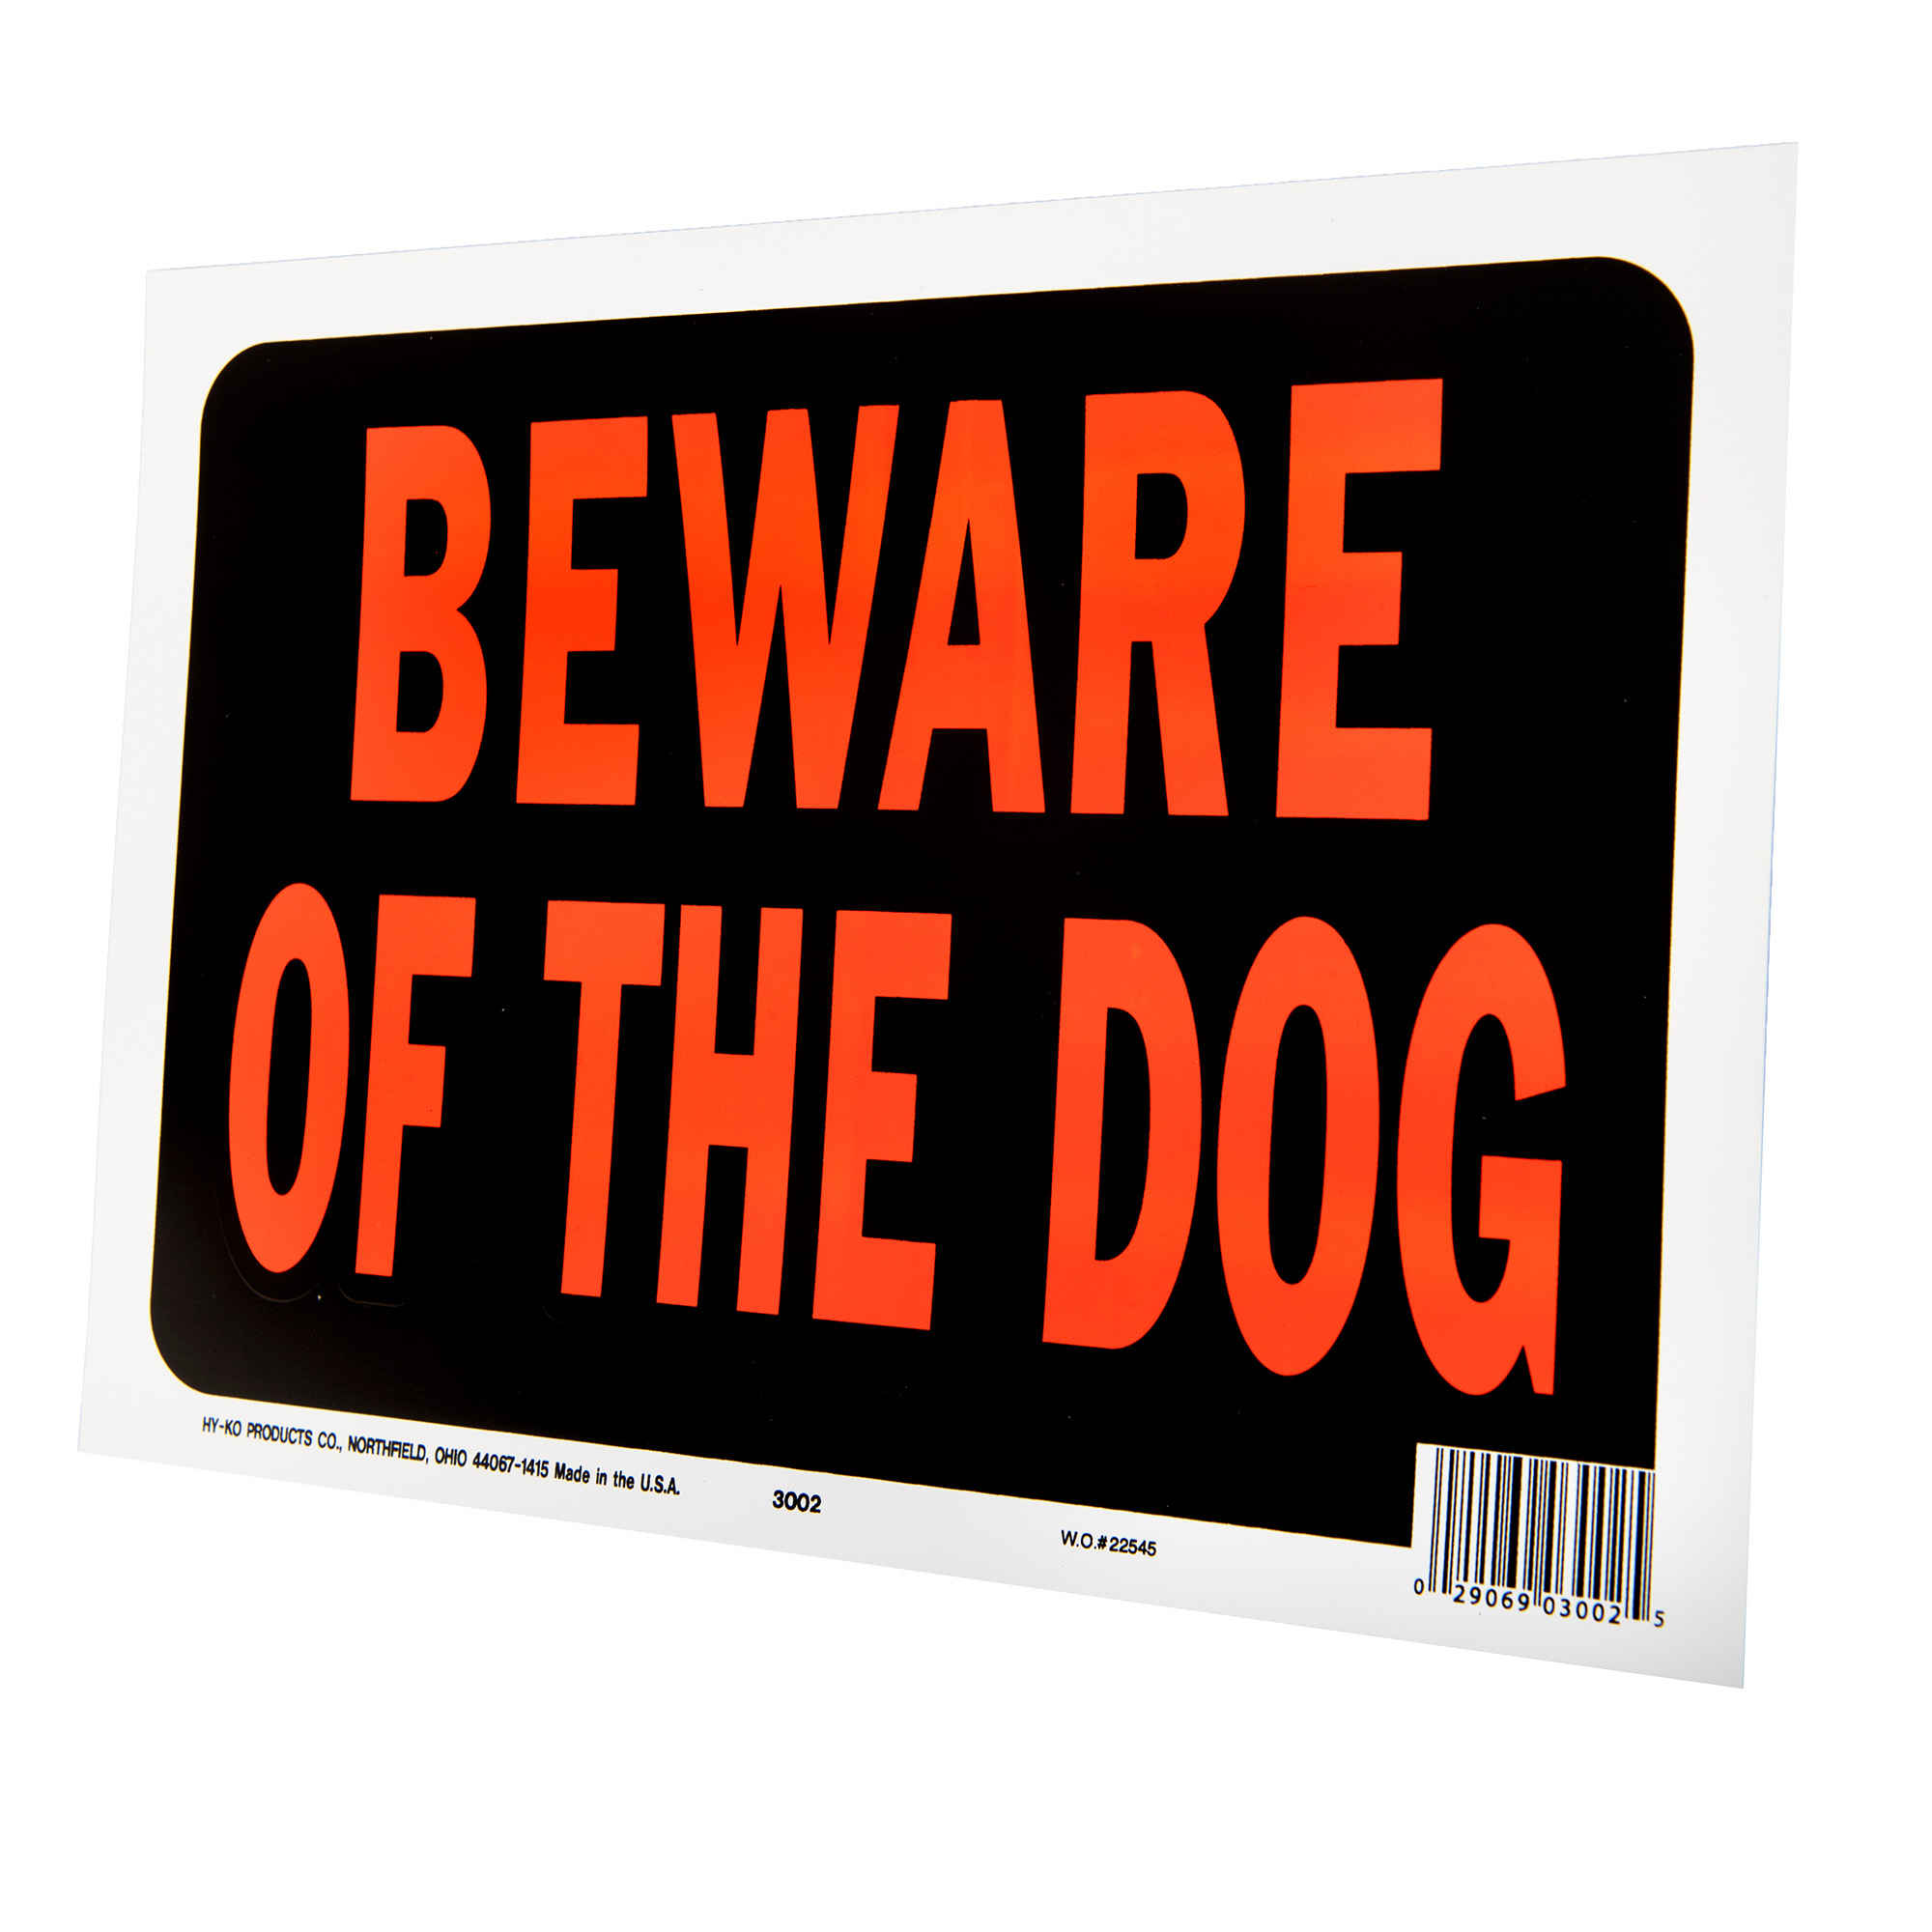 Hy-Ko 8.5 x 12 inch Plastic Beware of the Dog Sign - image 2 of 10